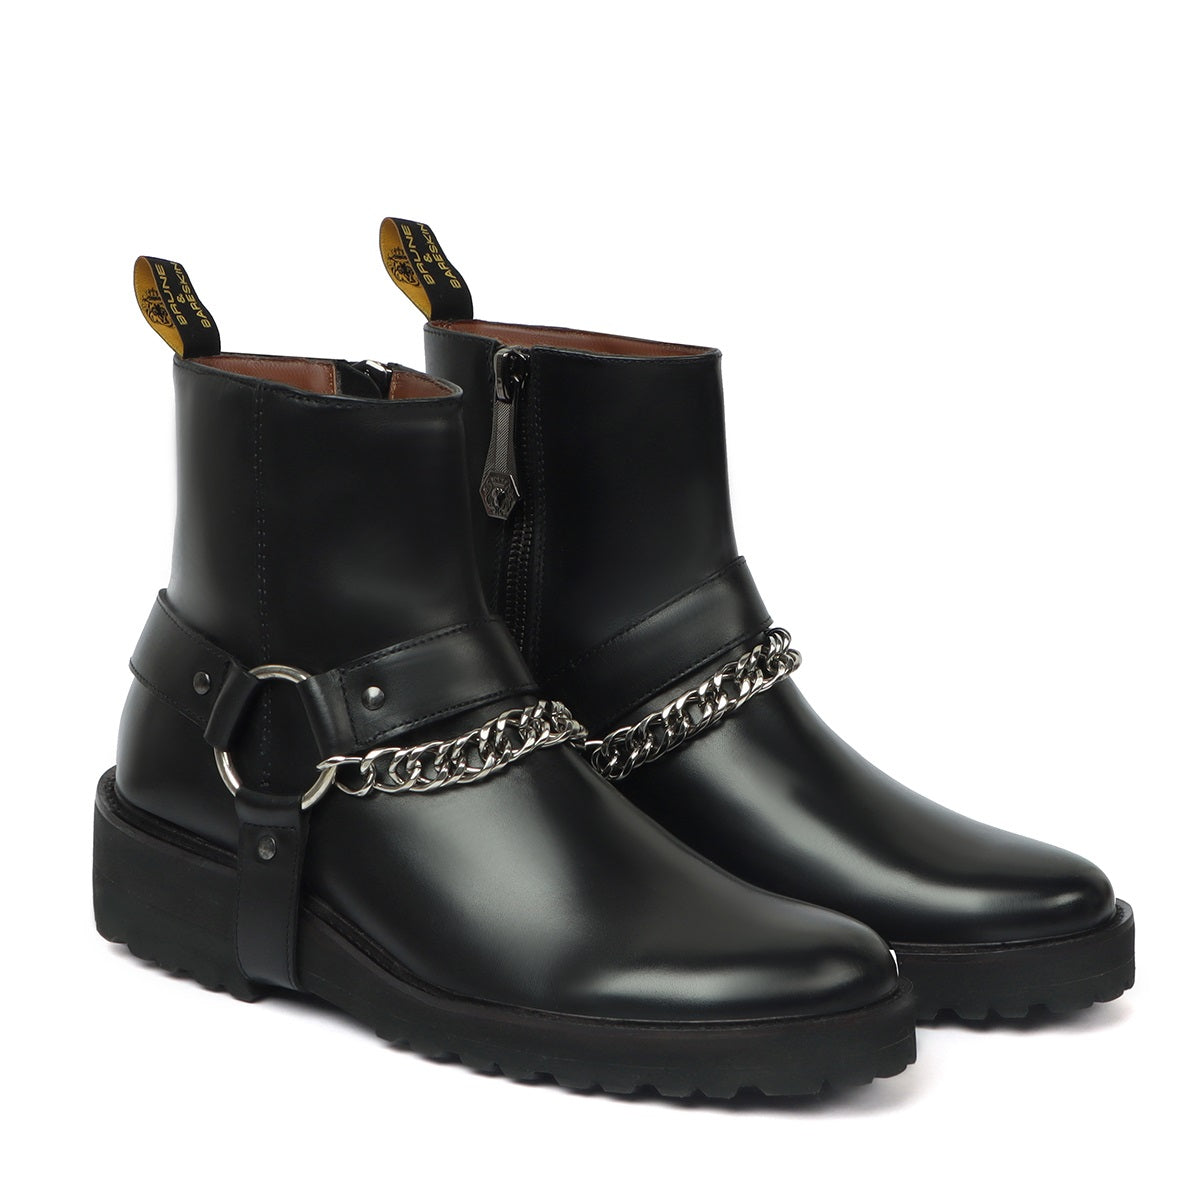 Men's Black Leather High Ankle Boots with Stylish Silver Chain Light Weight Leather Sole one and only by Brune & Bareskin